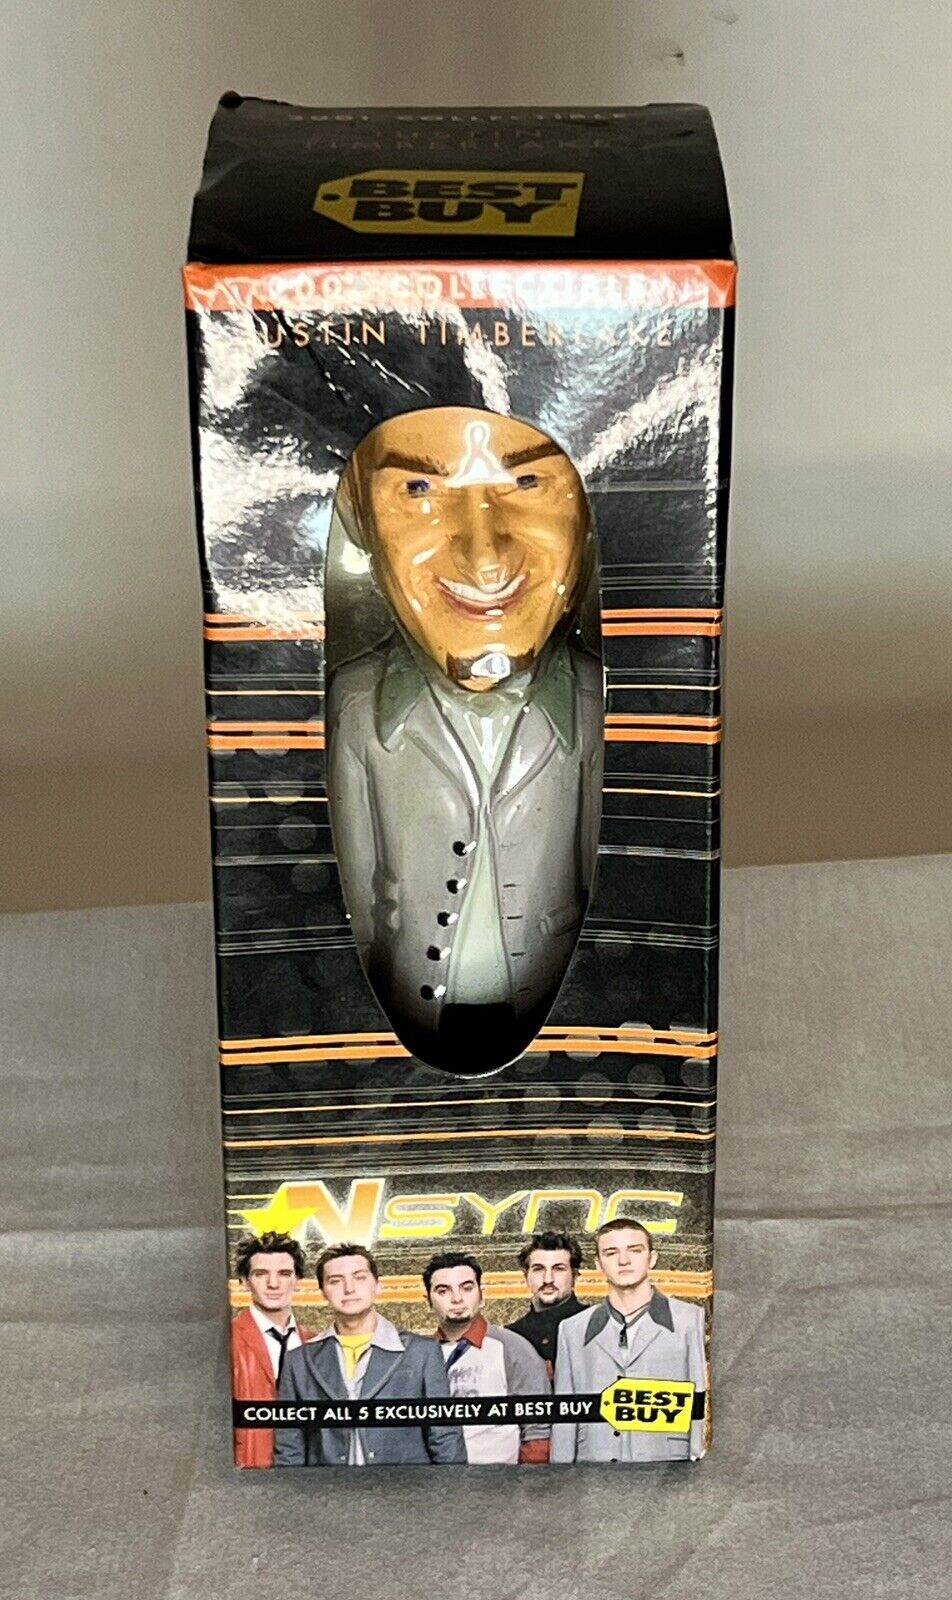 Vintage 2001 Best Buy Justin Timberlake Bobblehead Nsync Collectible Figure